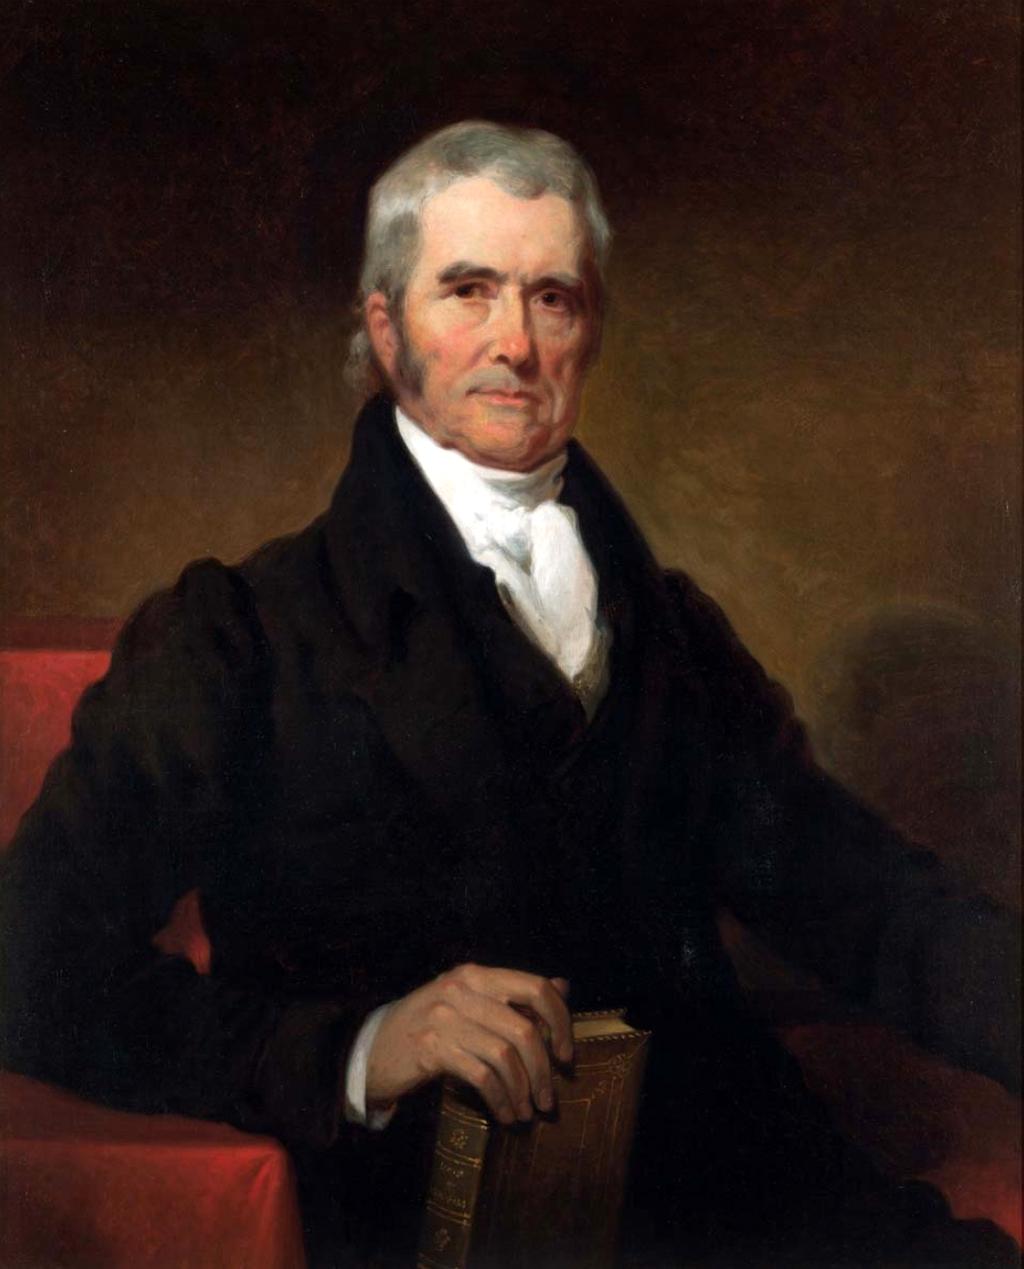 V When Jefferson became president, a few of the appointment papers (commissions) had not yet been delivered